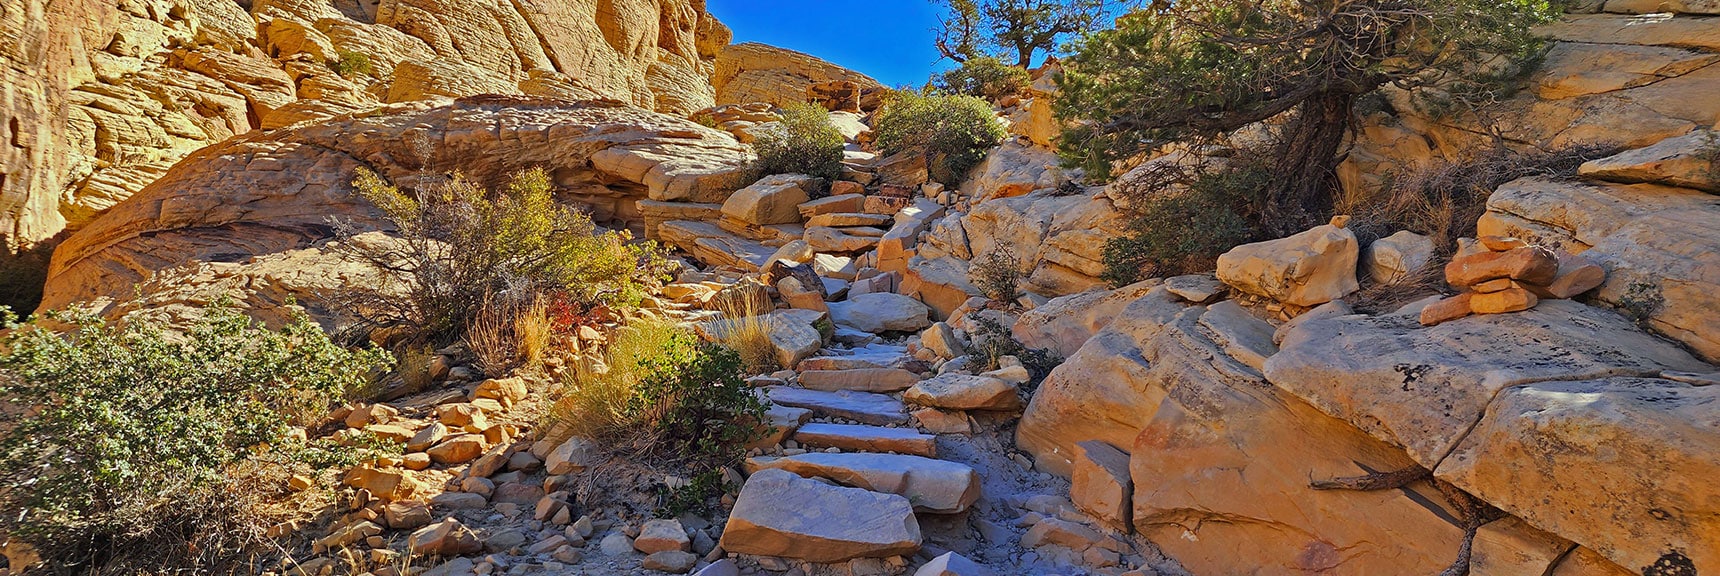 More Artistic Sandstone Stairways. The Natural Art Here is Incredible! | Calico Tanks | Red Rock Canyon National Conservation Area, Nevada